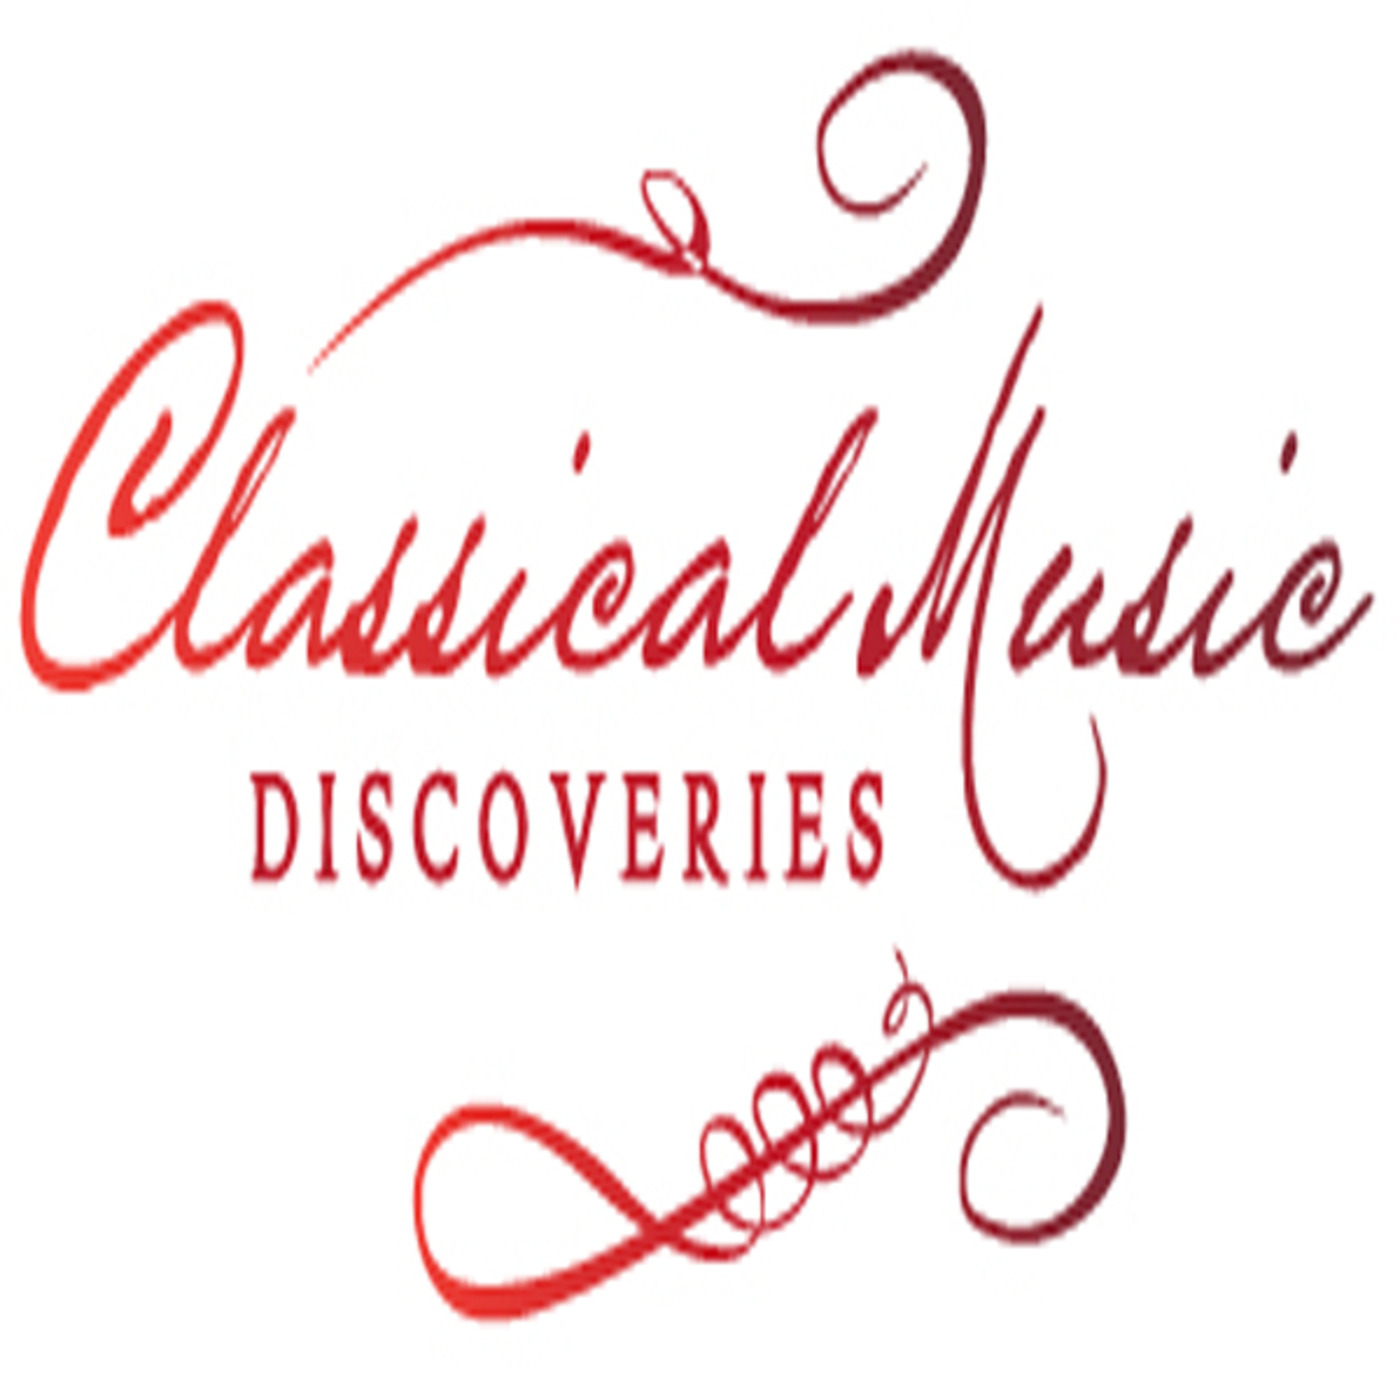 Classical Music Discoveries podcast